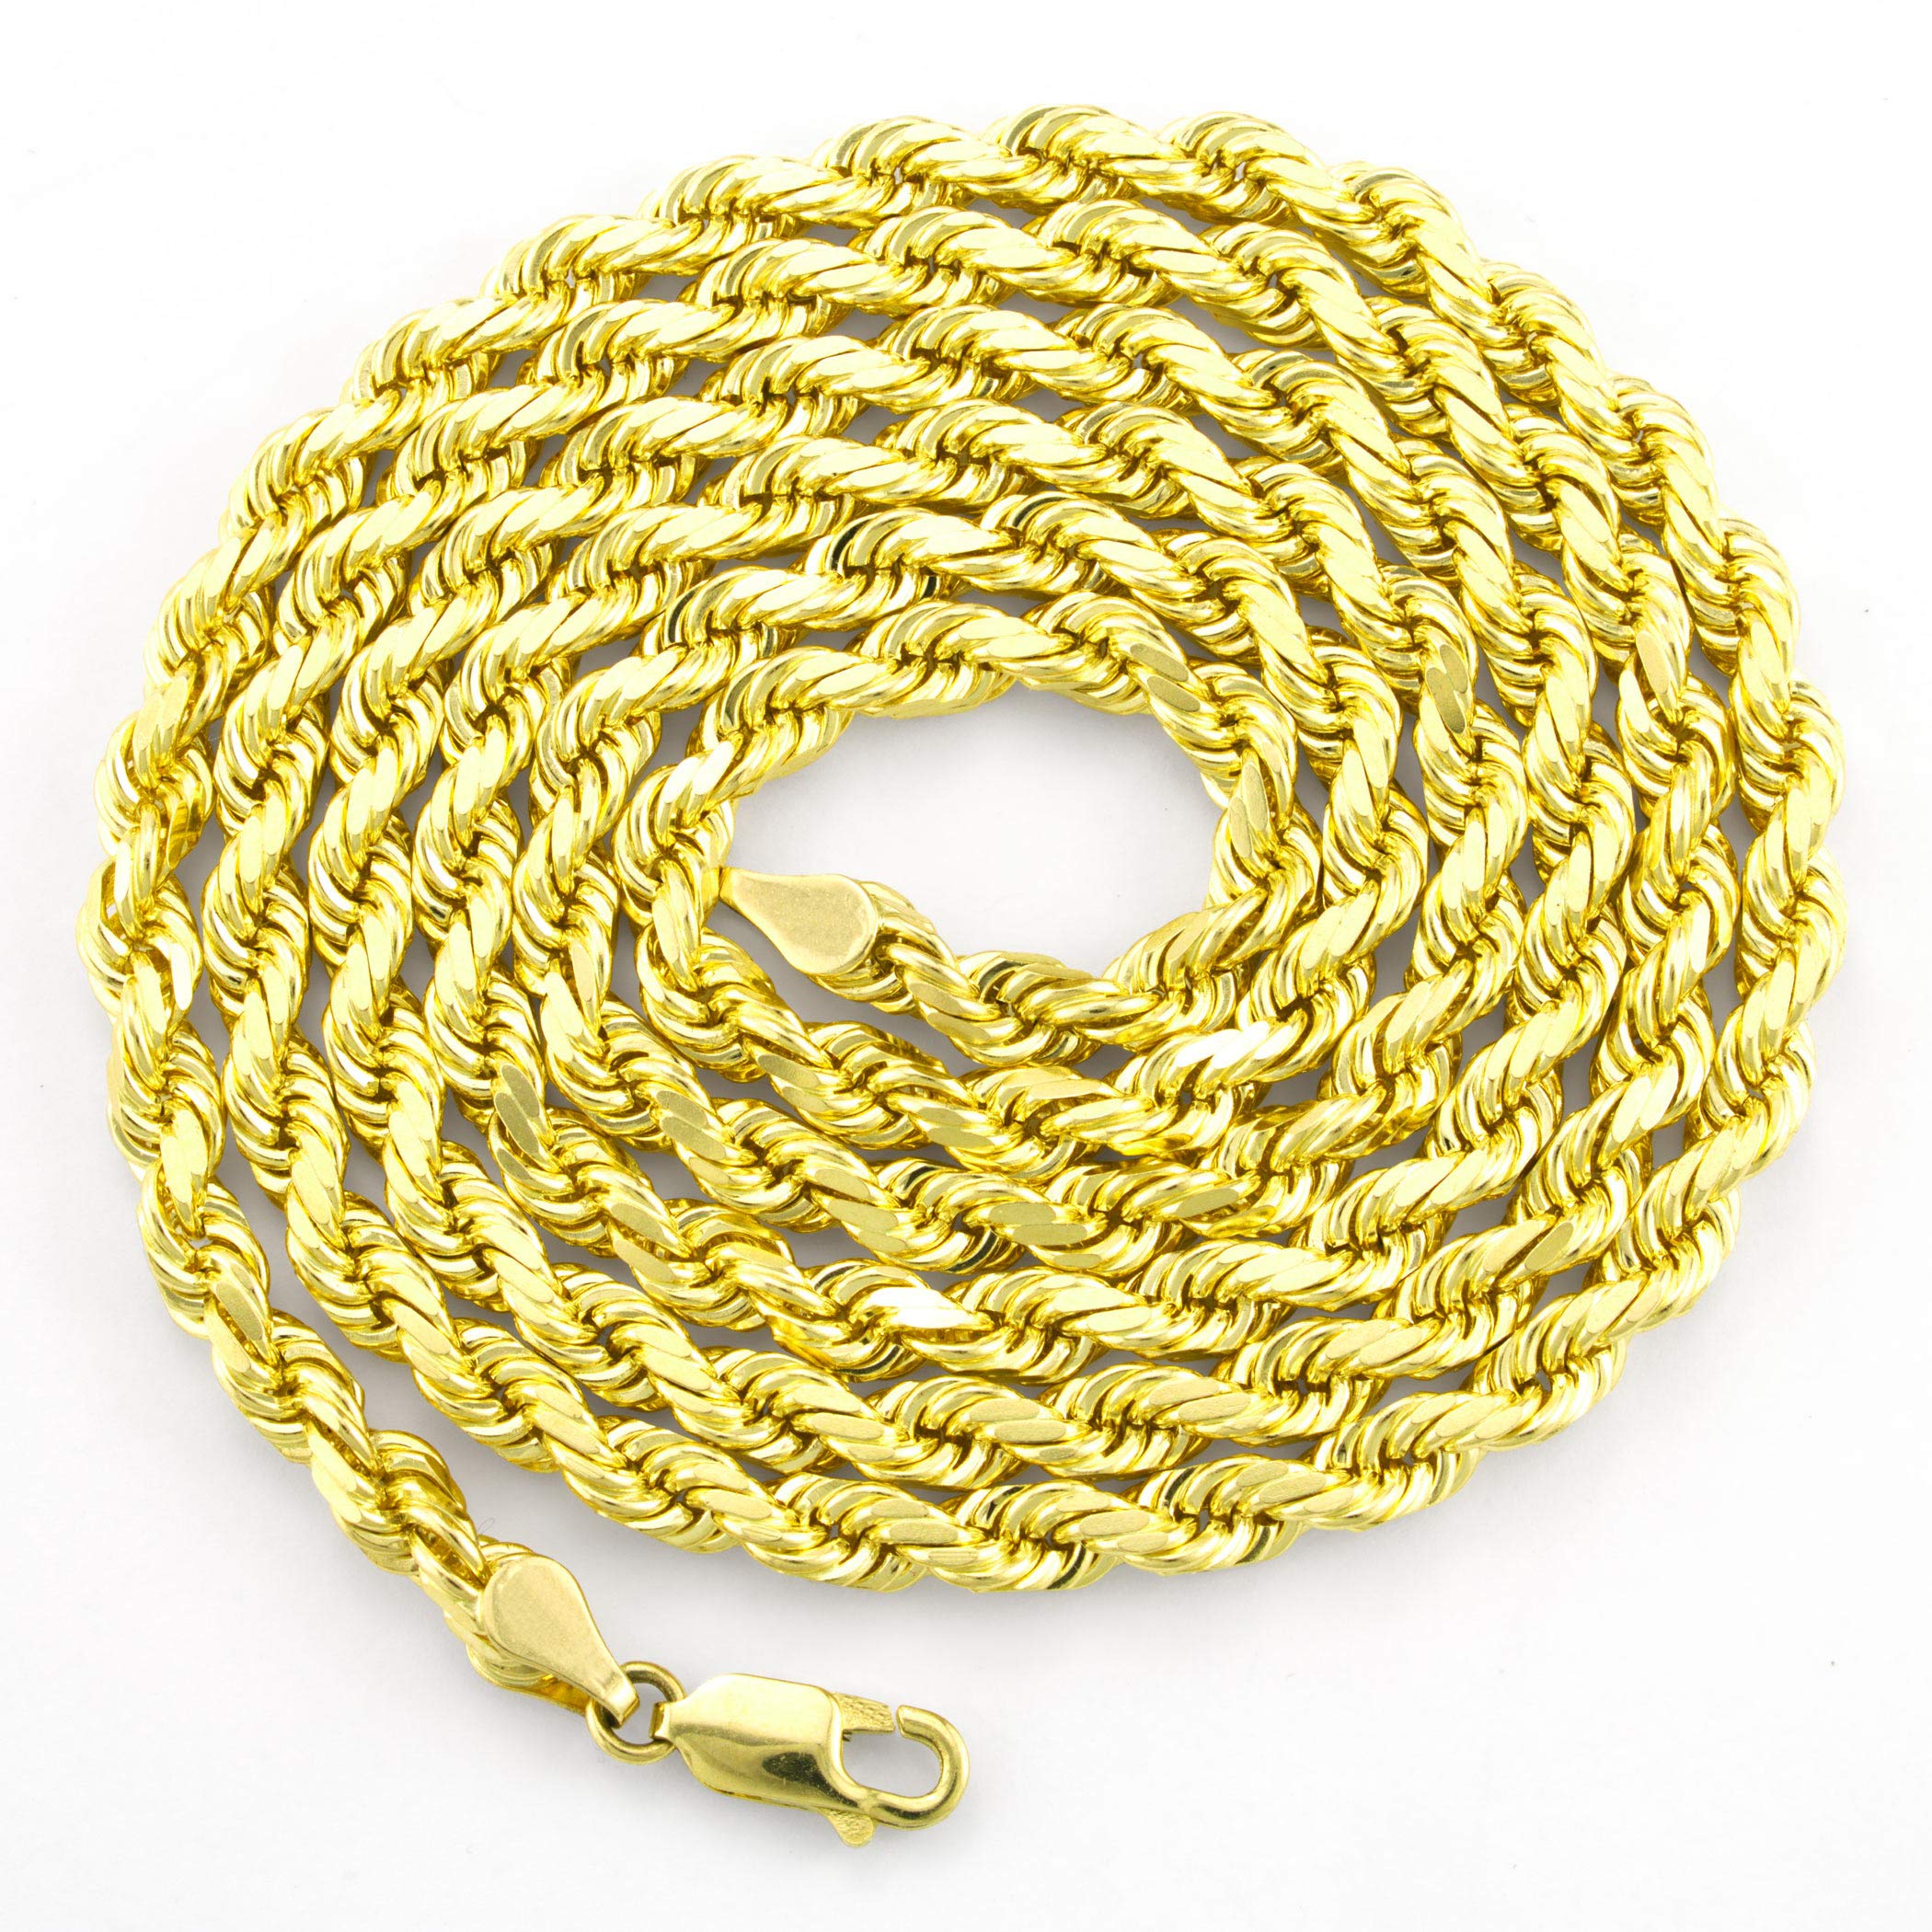 Nuragold 14k Yellow Gold 5mm Solid Rope Chain Diamond Cut Pendant Necklace, Mens Jewelry Lobster Clasp 20